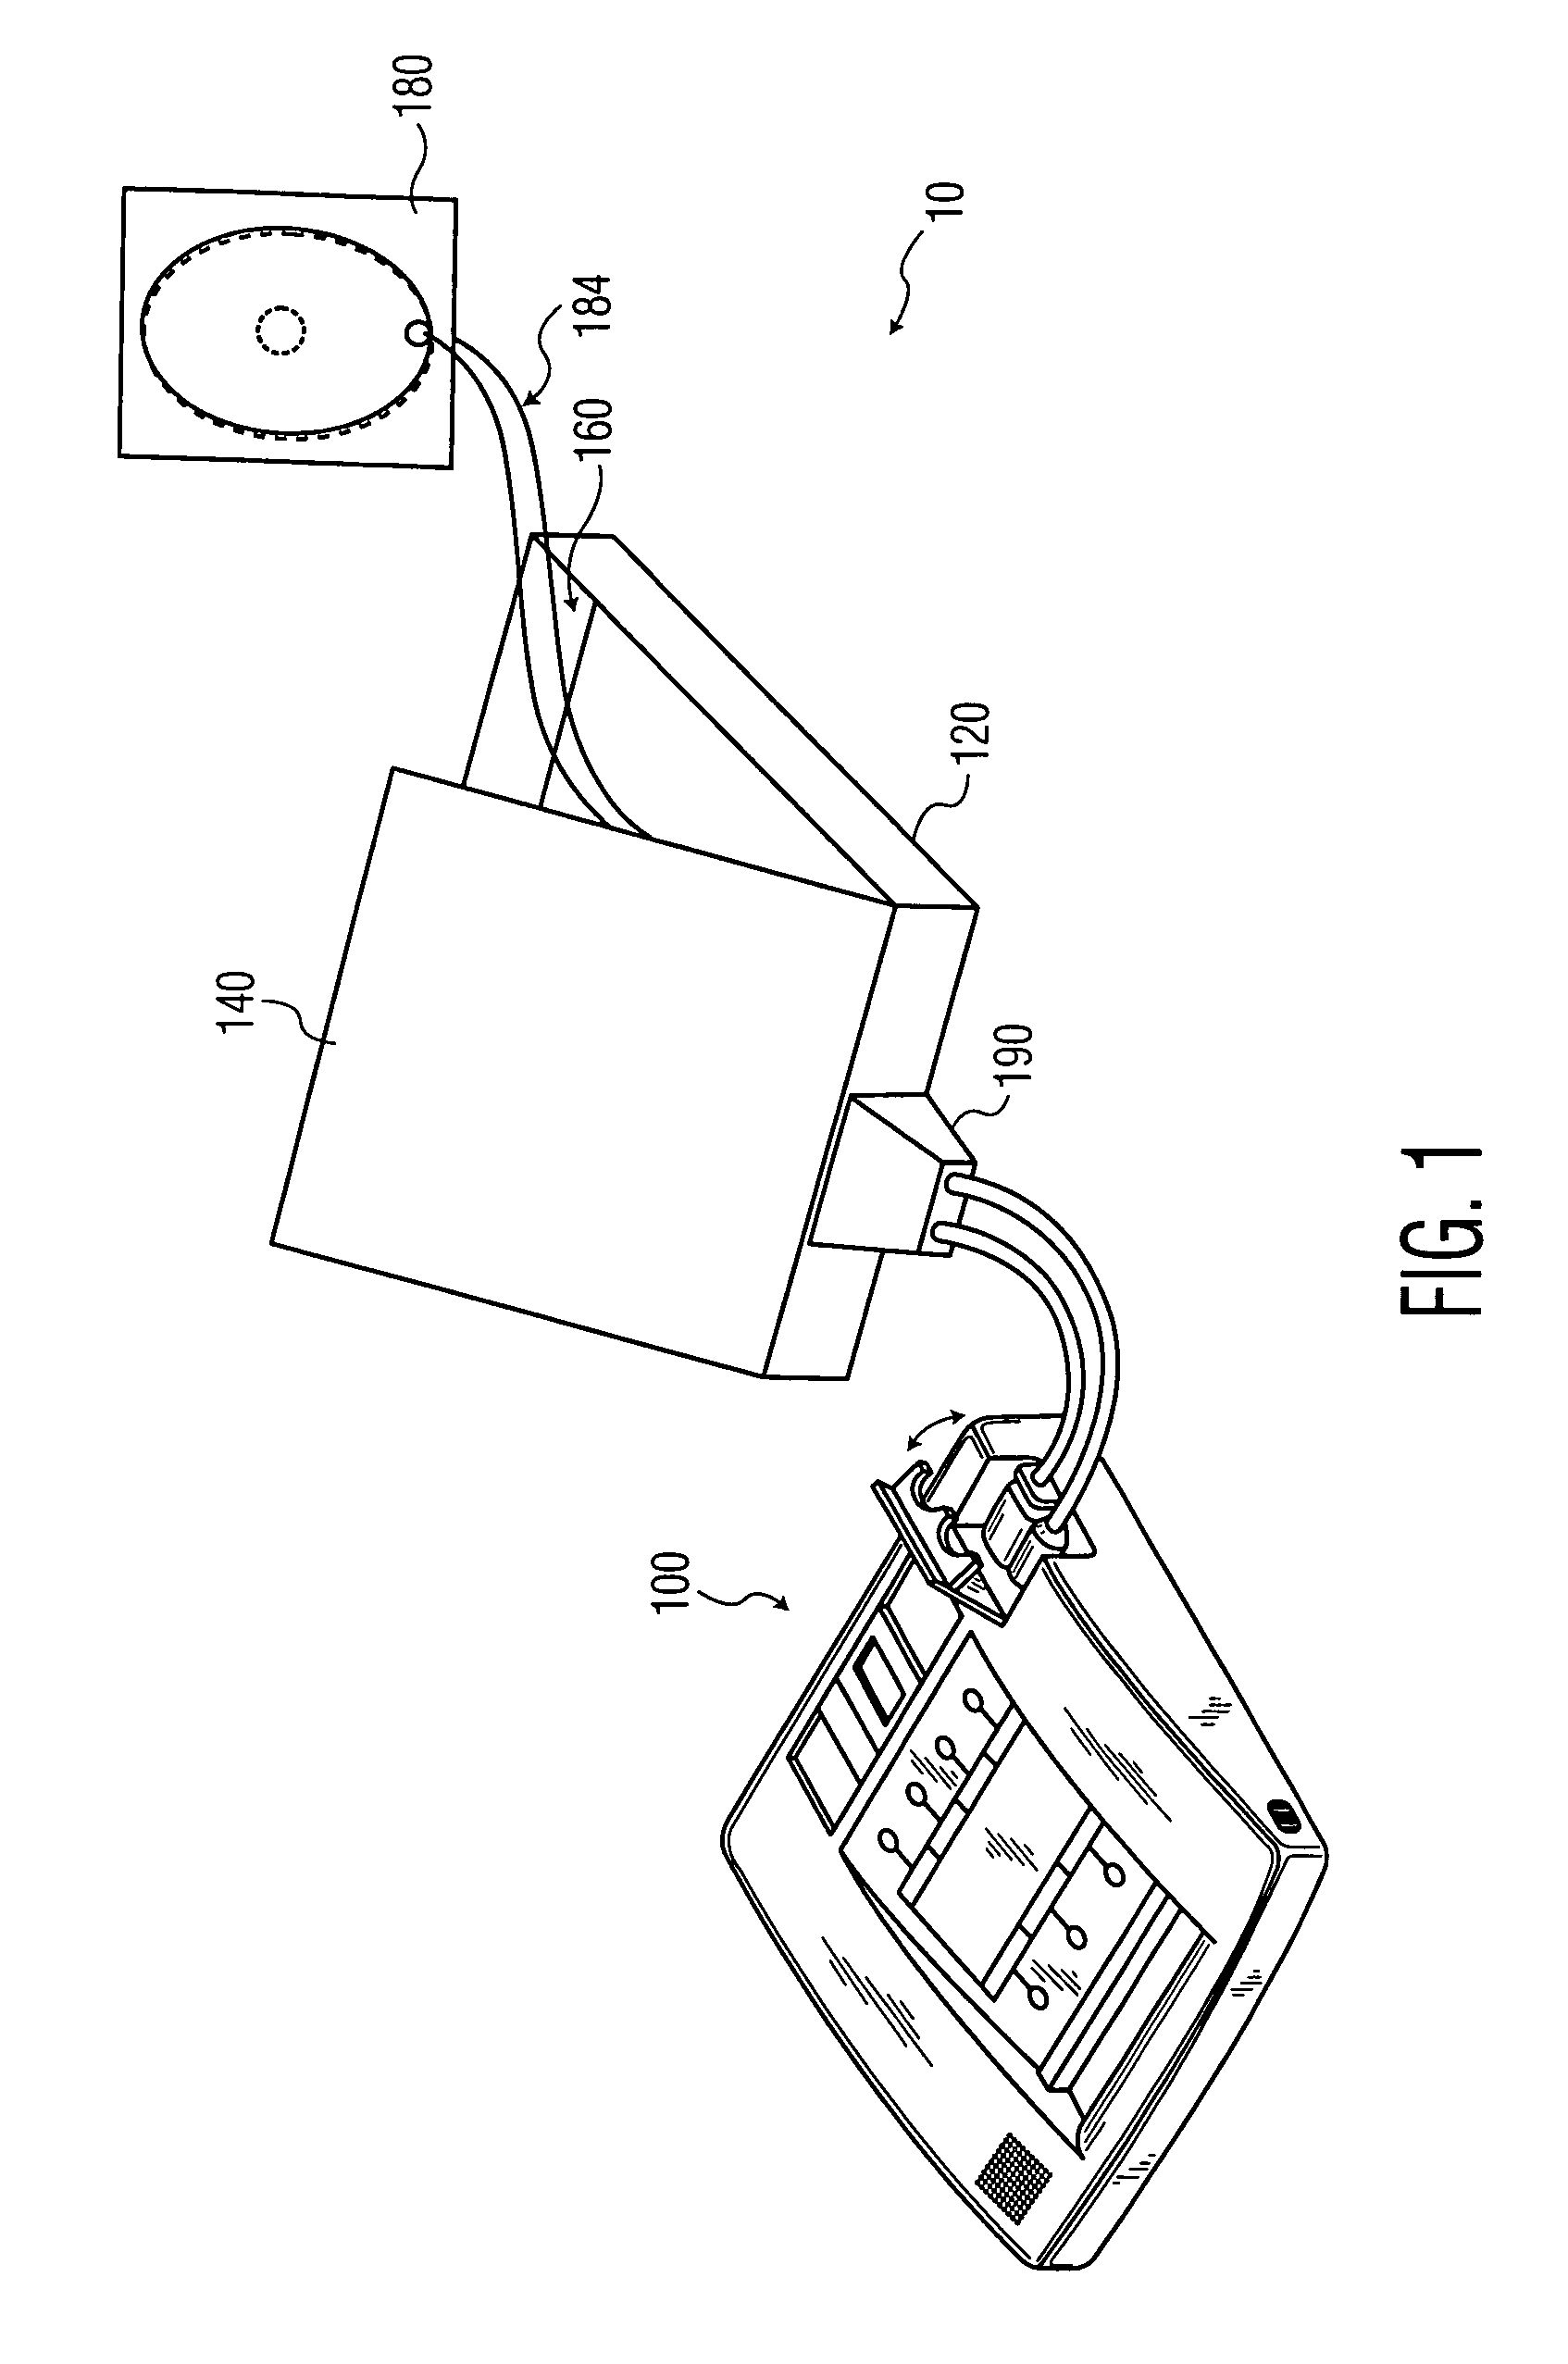 Method of detecting when electrode pads have been handled or removed from their package